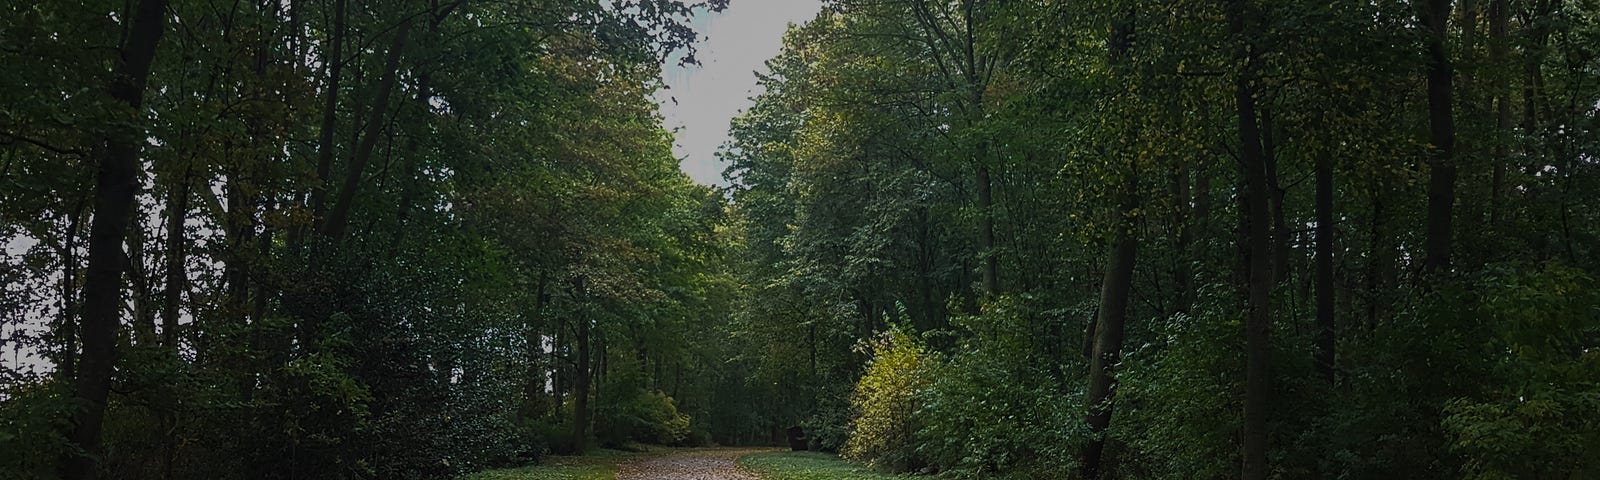 An image of a road through the woods, with autumn leaves on the ground.